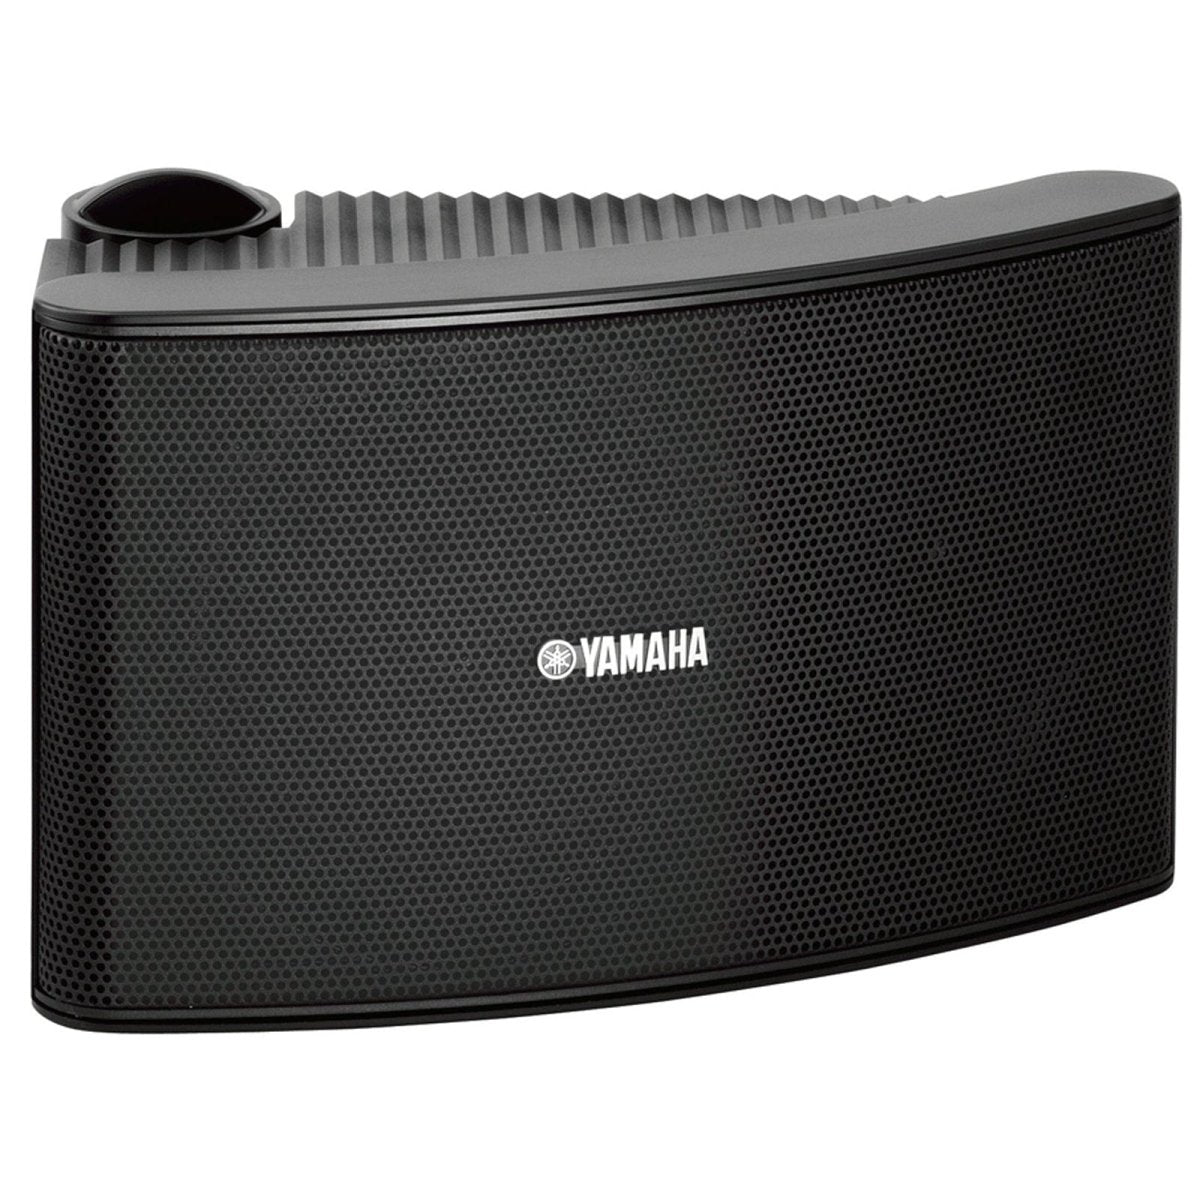 Yamaha NSAW592BLB 150W All-Weather Outdoor Speakers (Pair) - Black - Atlantic Electrics